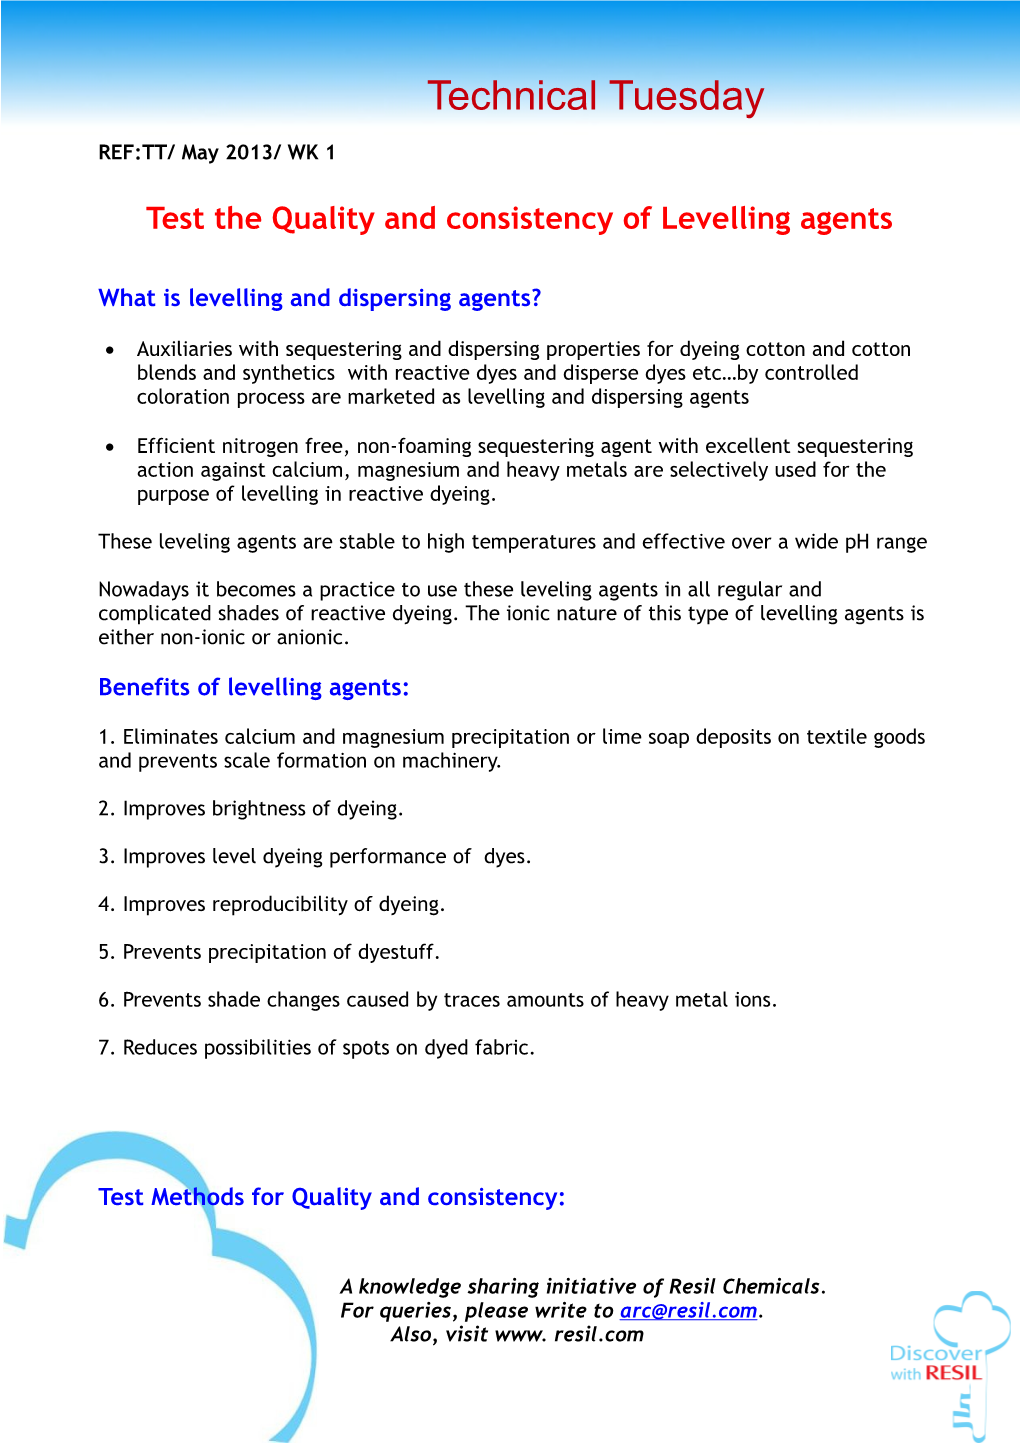 What Is Levelling and Dispersing Agents?